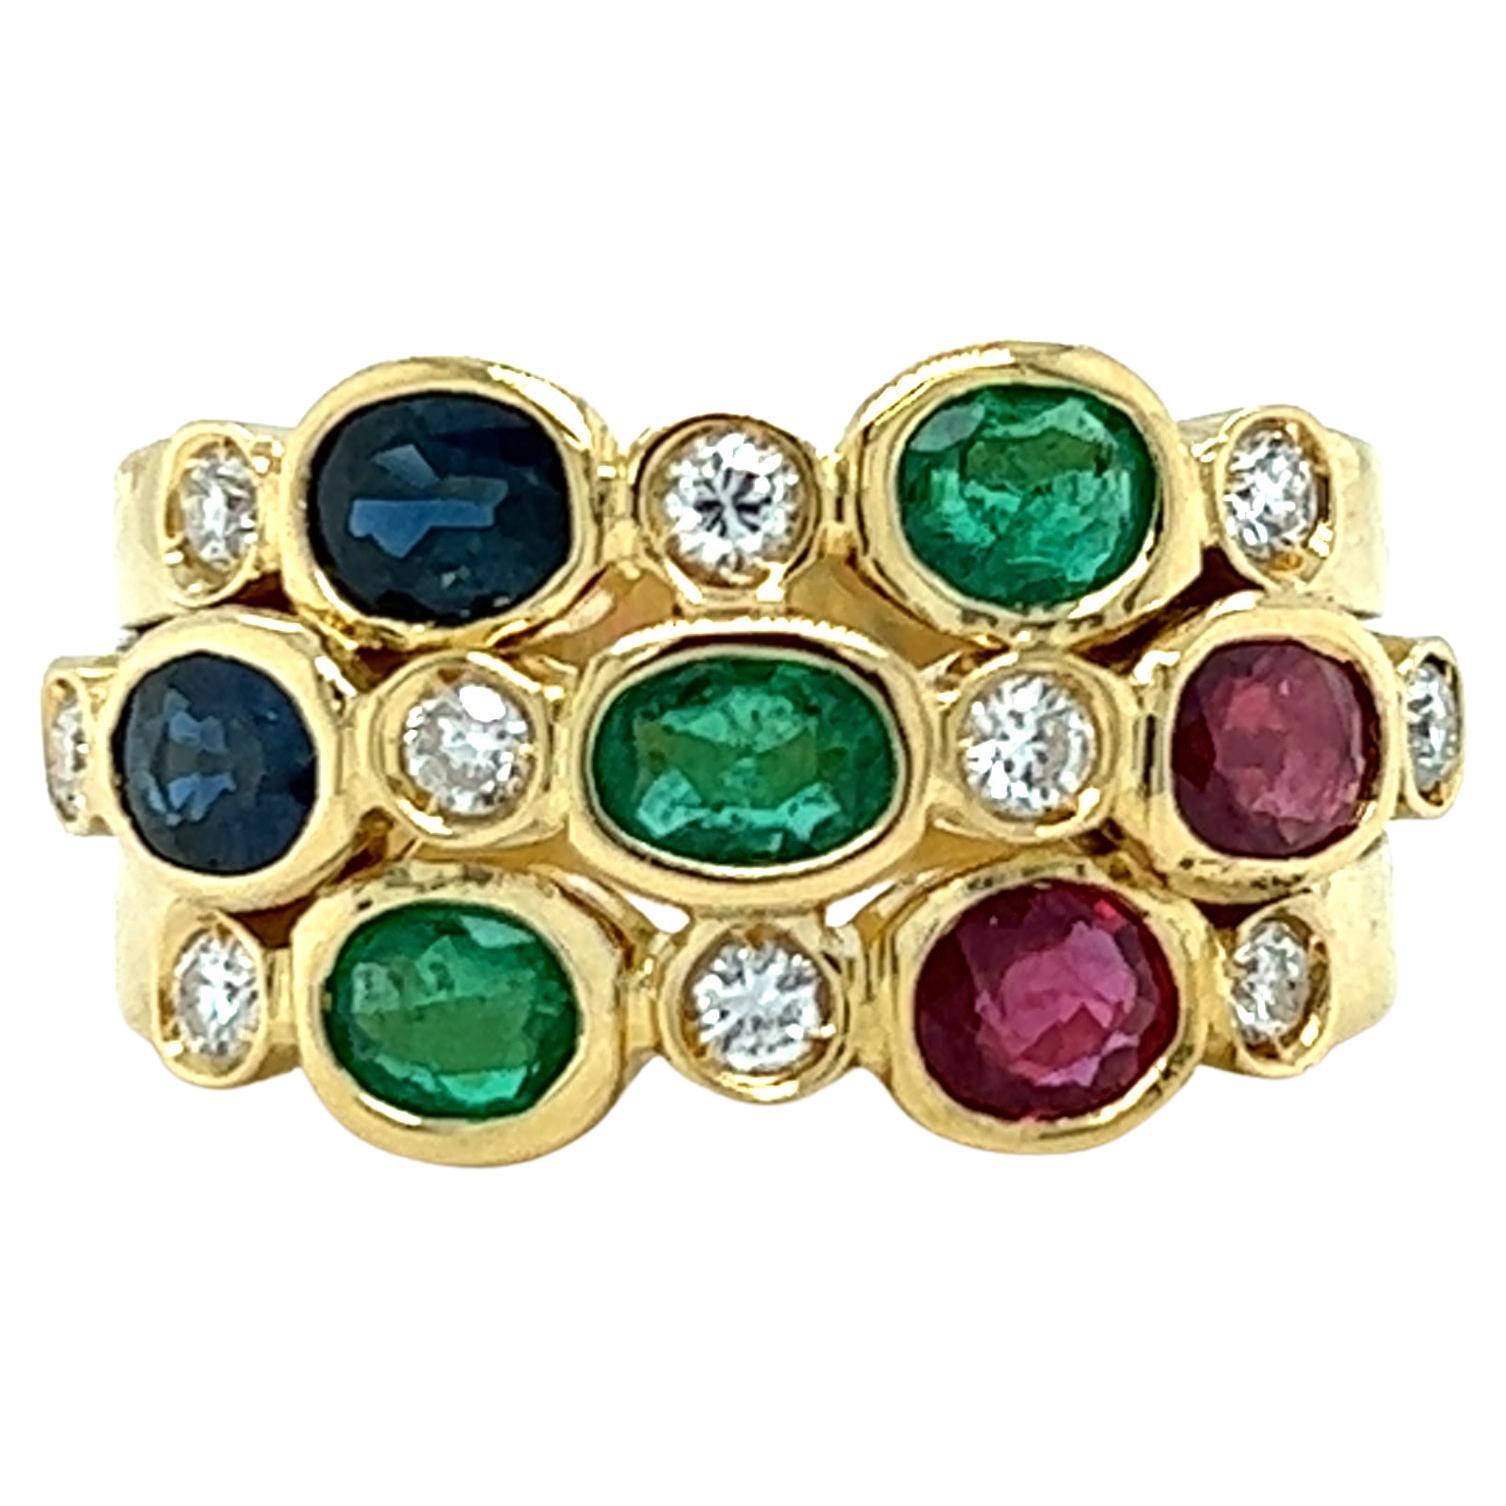 Emerald, Sapphire, Ruby and Diamond Ring in 18K Gold